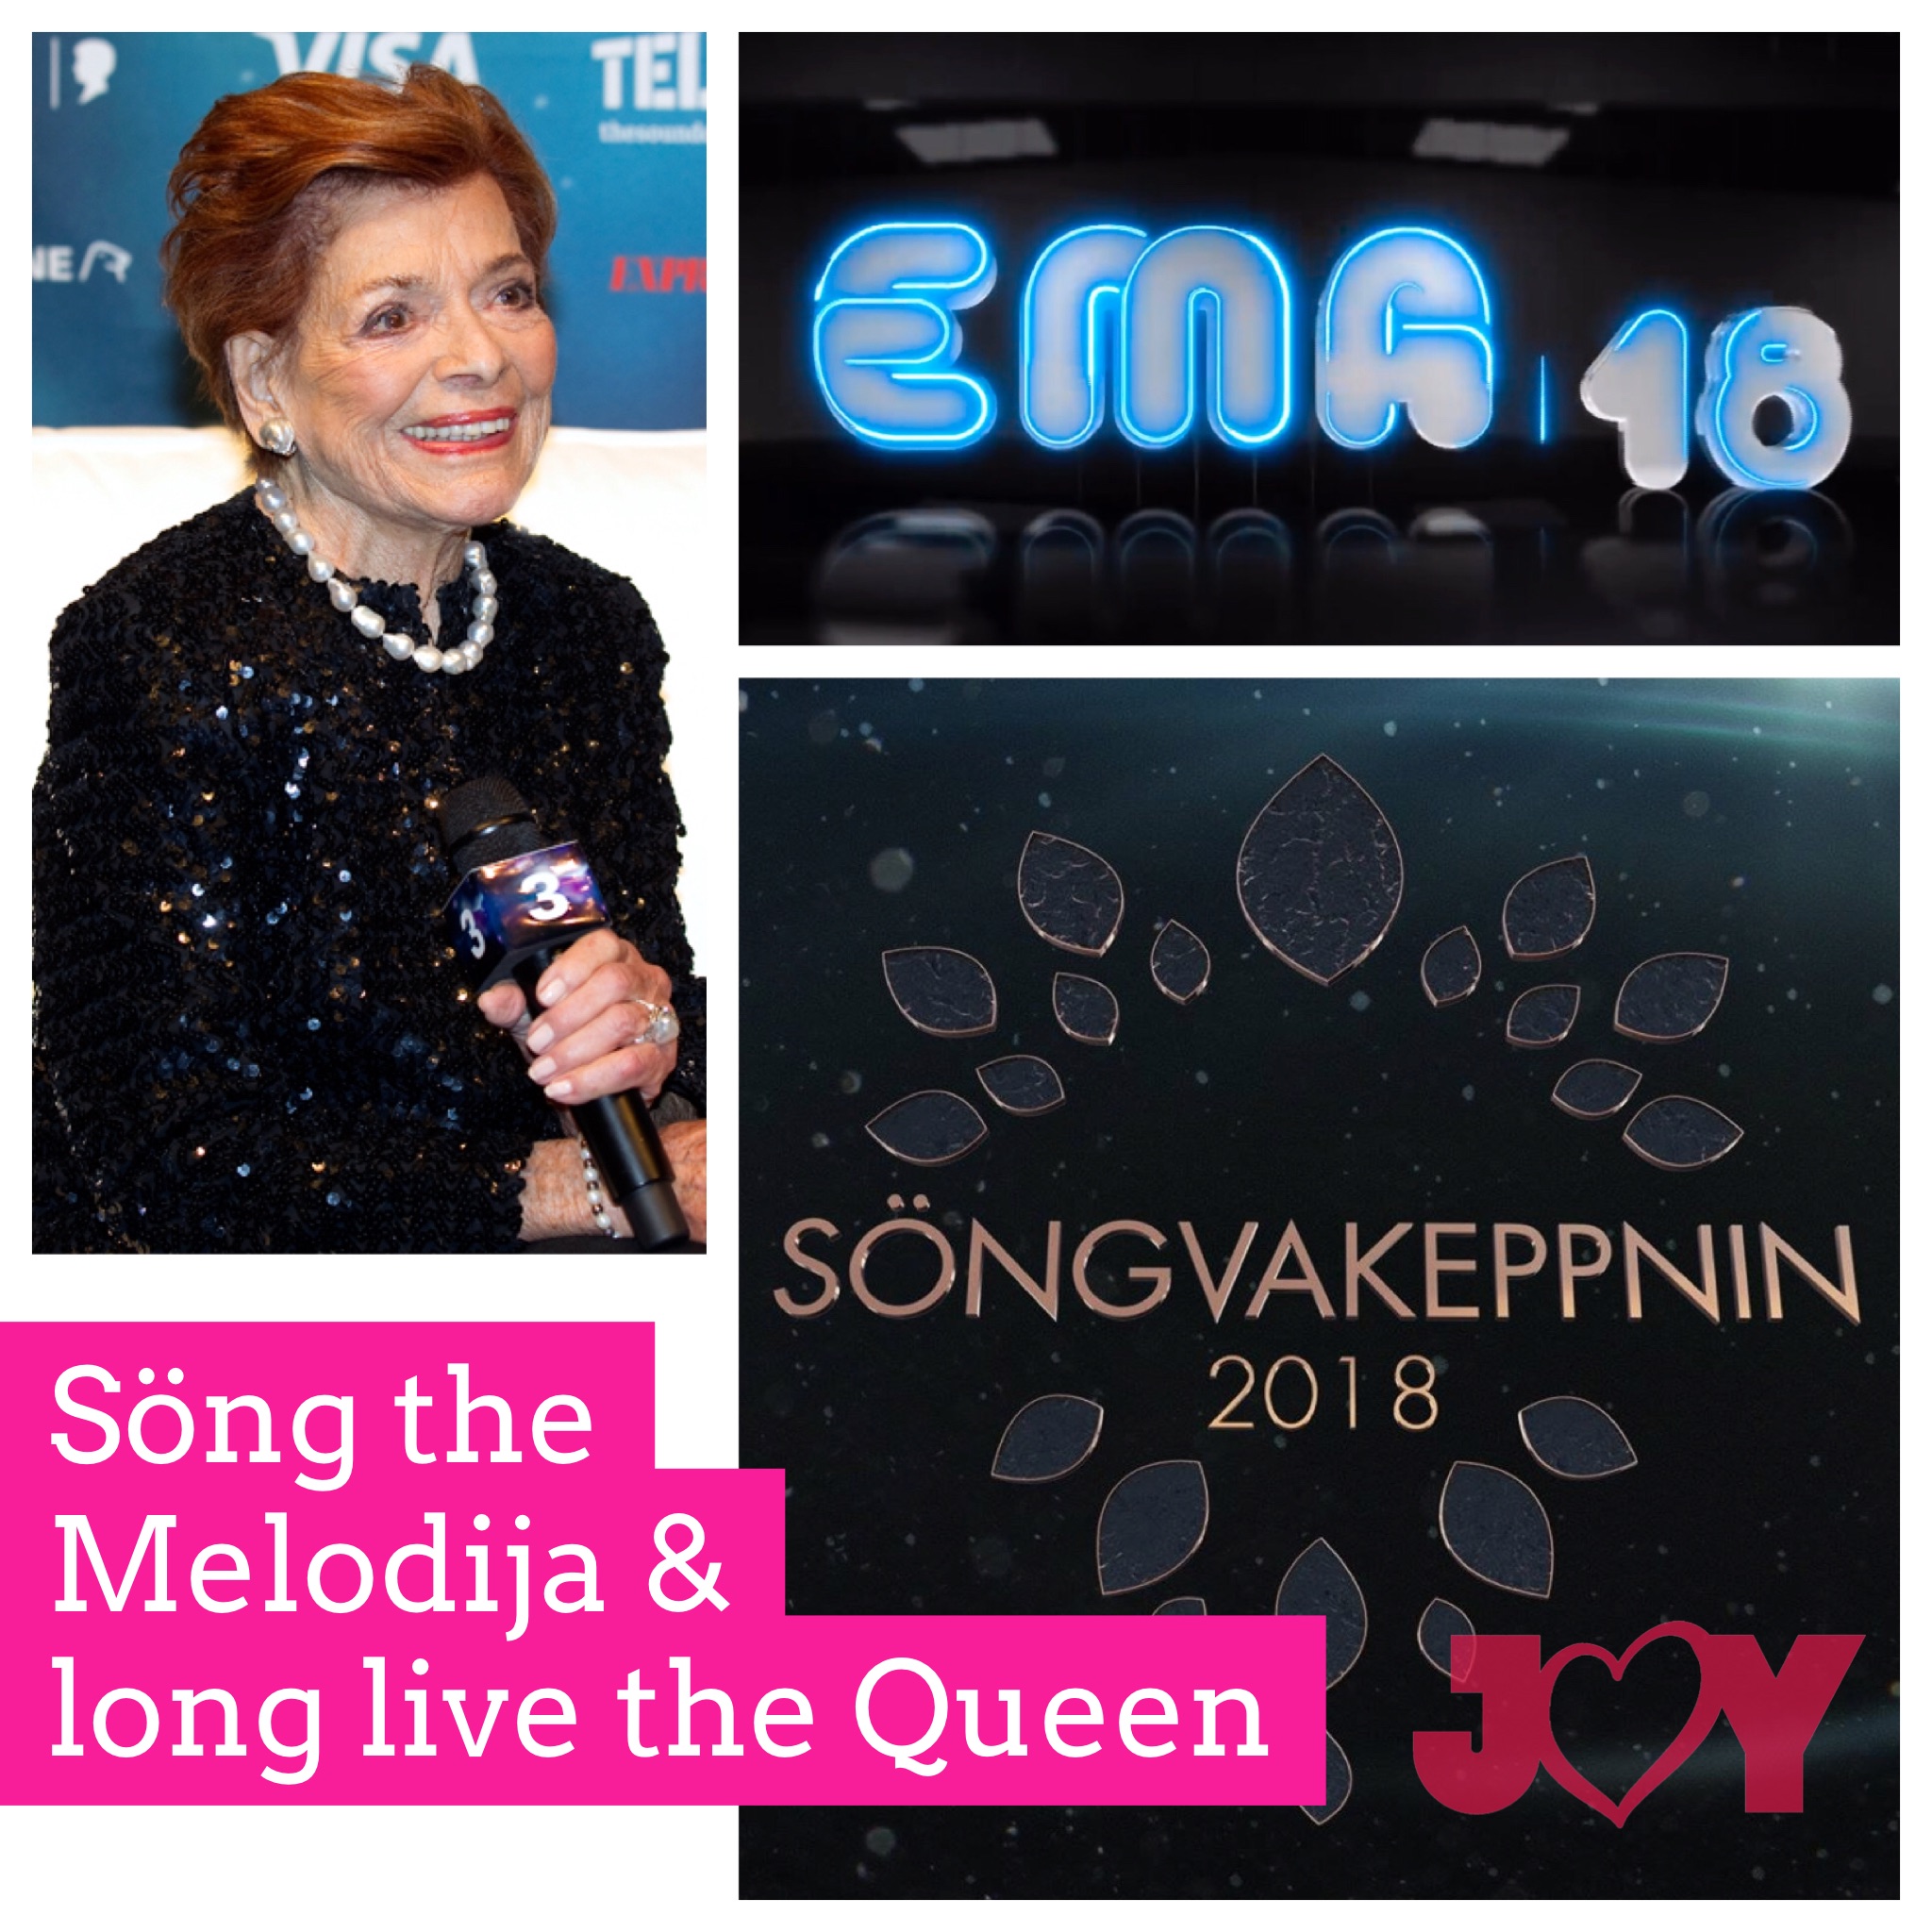 Söng the Melodija & long live the Queen: Recapping Slovenia and Iceland and remembering Lys Assia